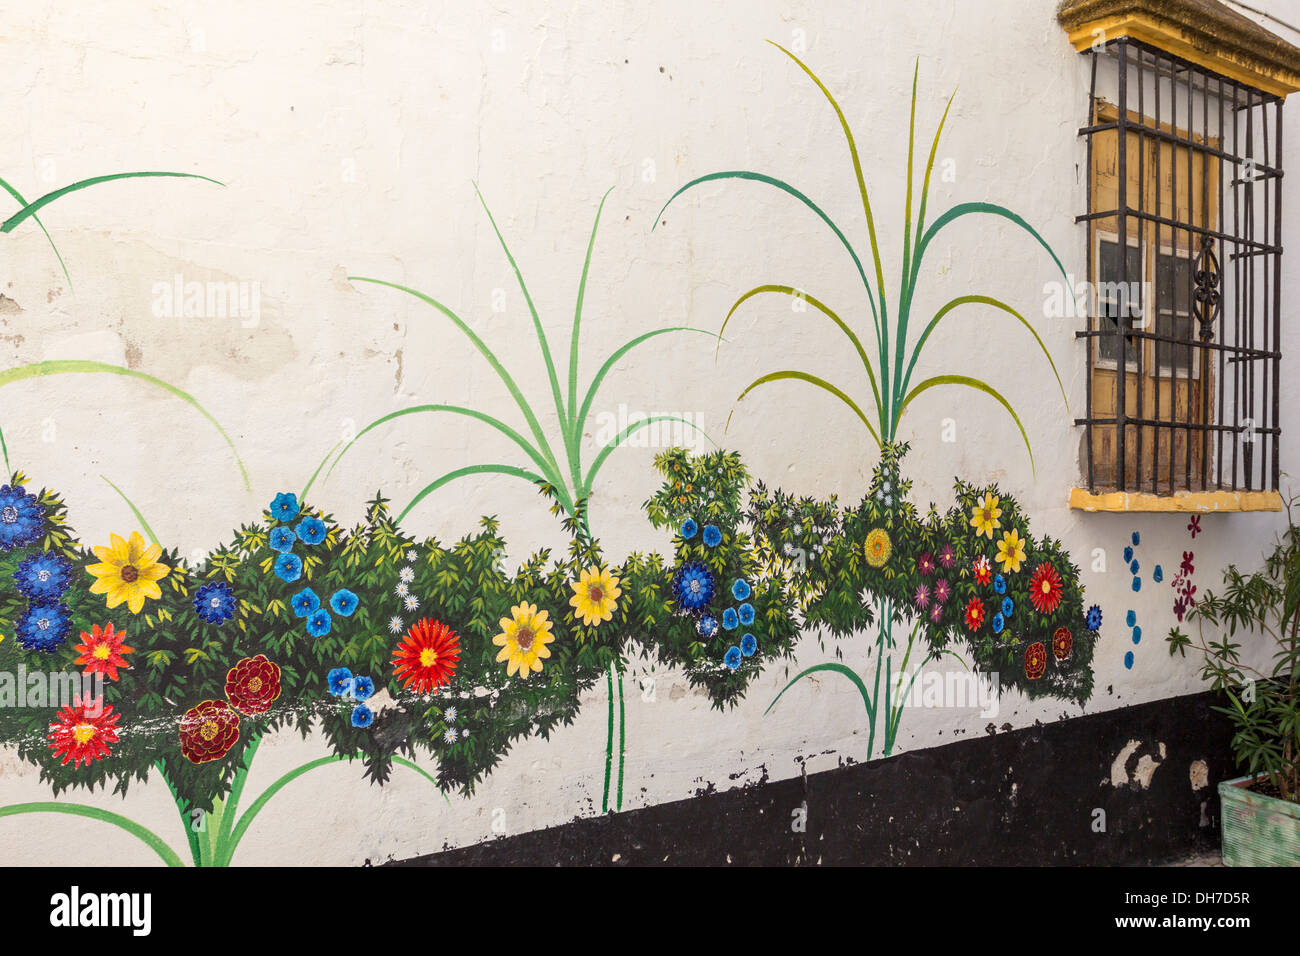 COLOURFUL MURAL OF FLOWERS PAINTED ON A WALL IN THE OLD TOWN OF MARBELLA SPAIN Stock Photo